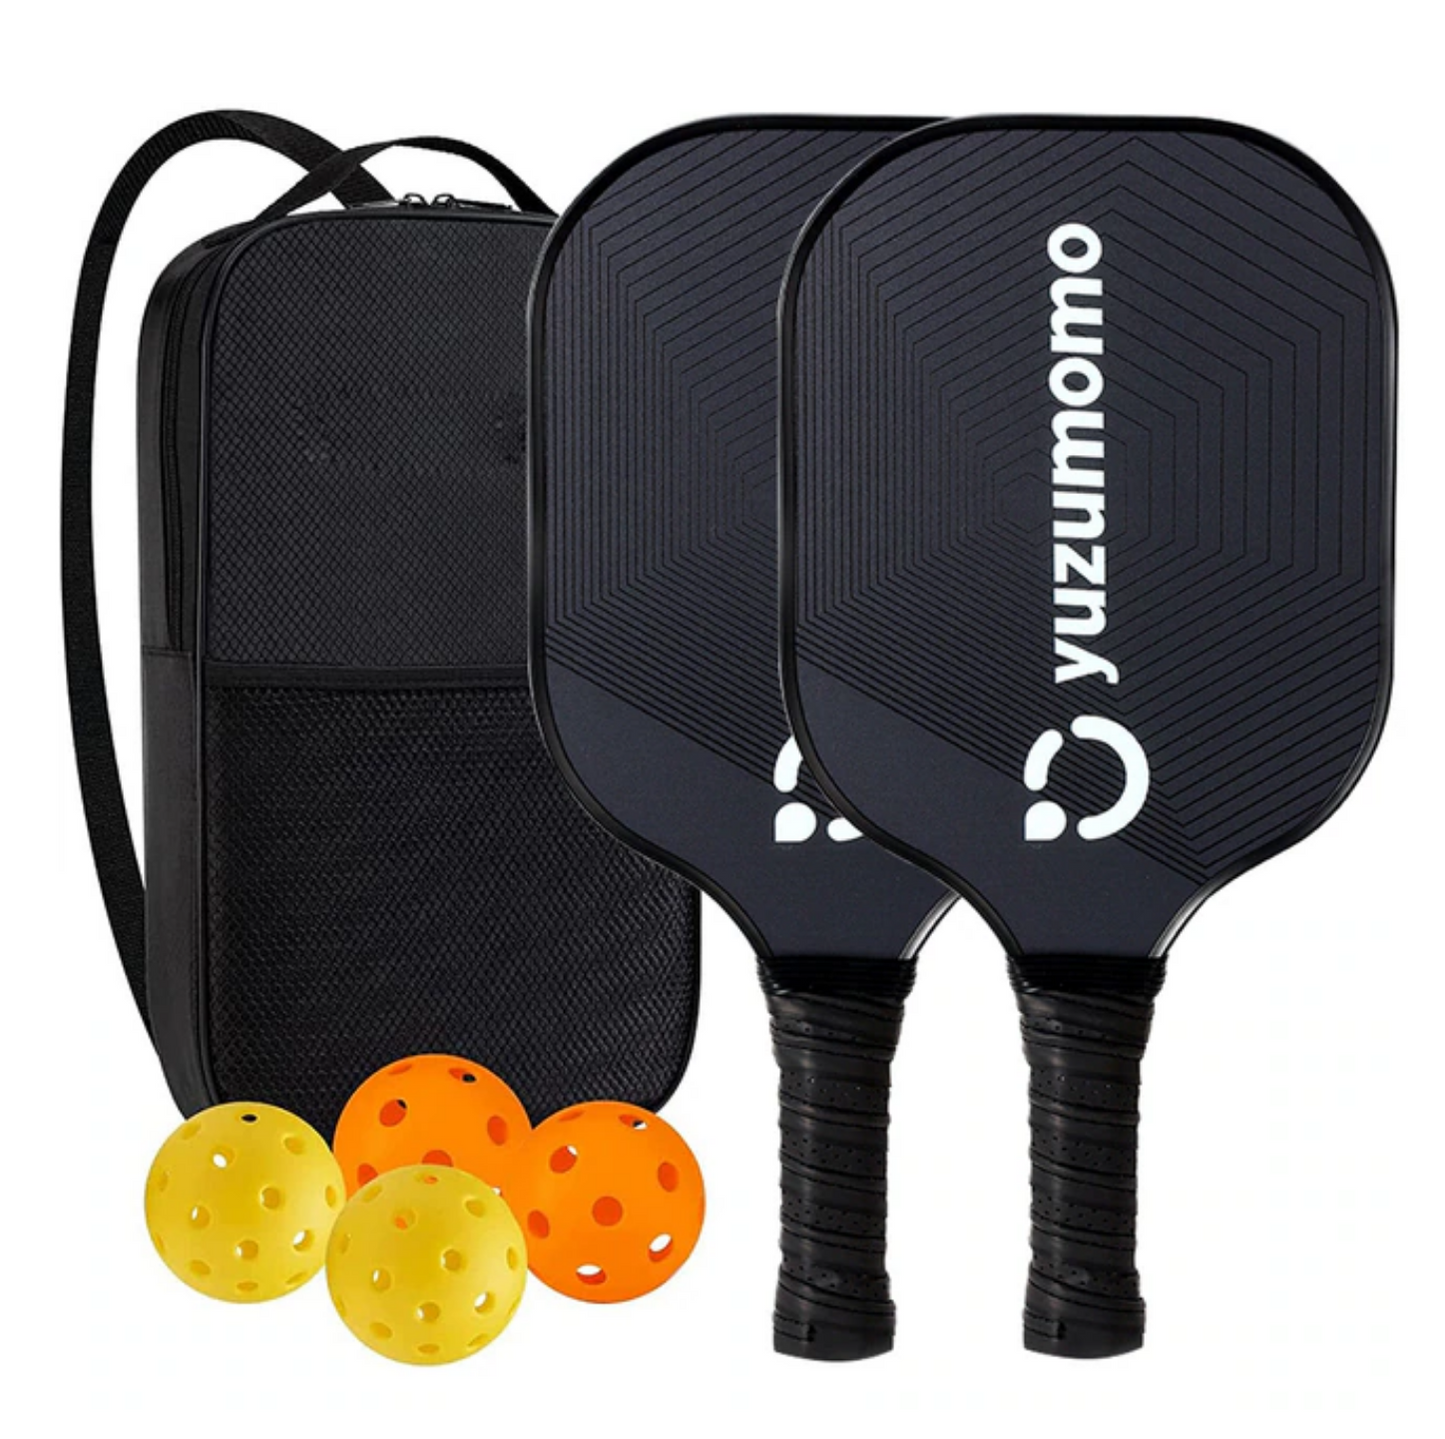 Pickleball paddle kit with balls and a bag.